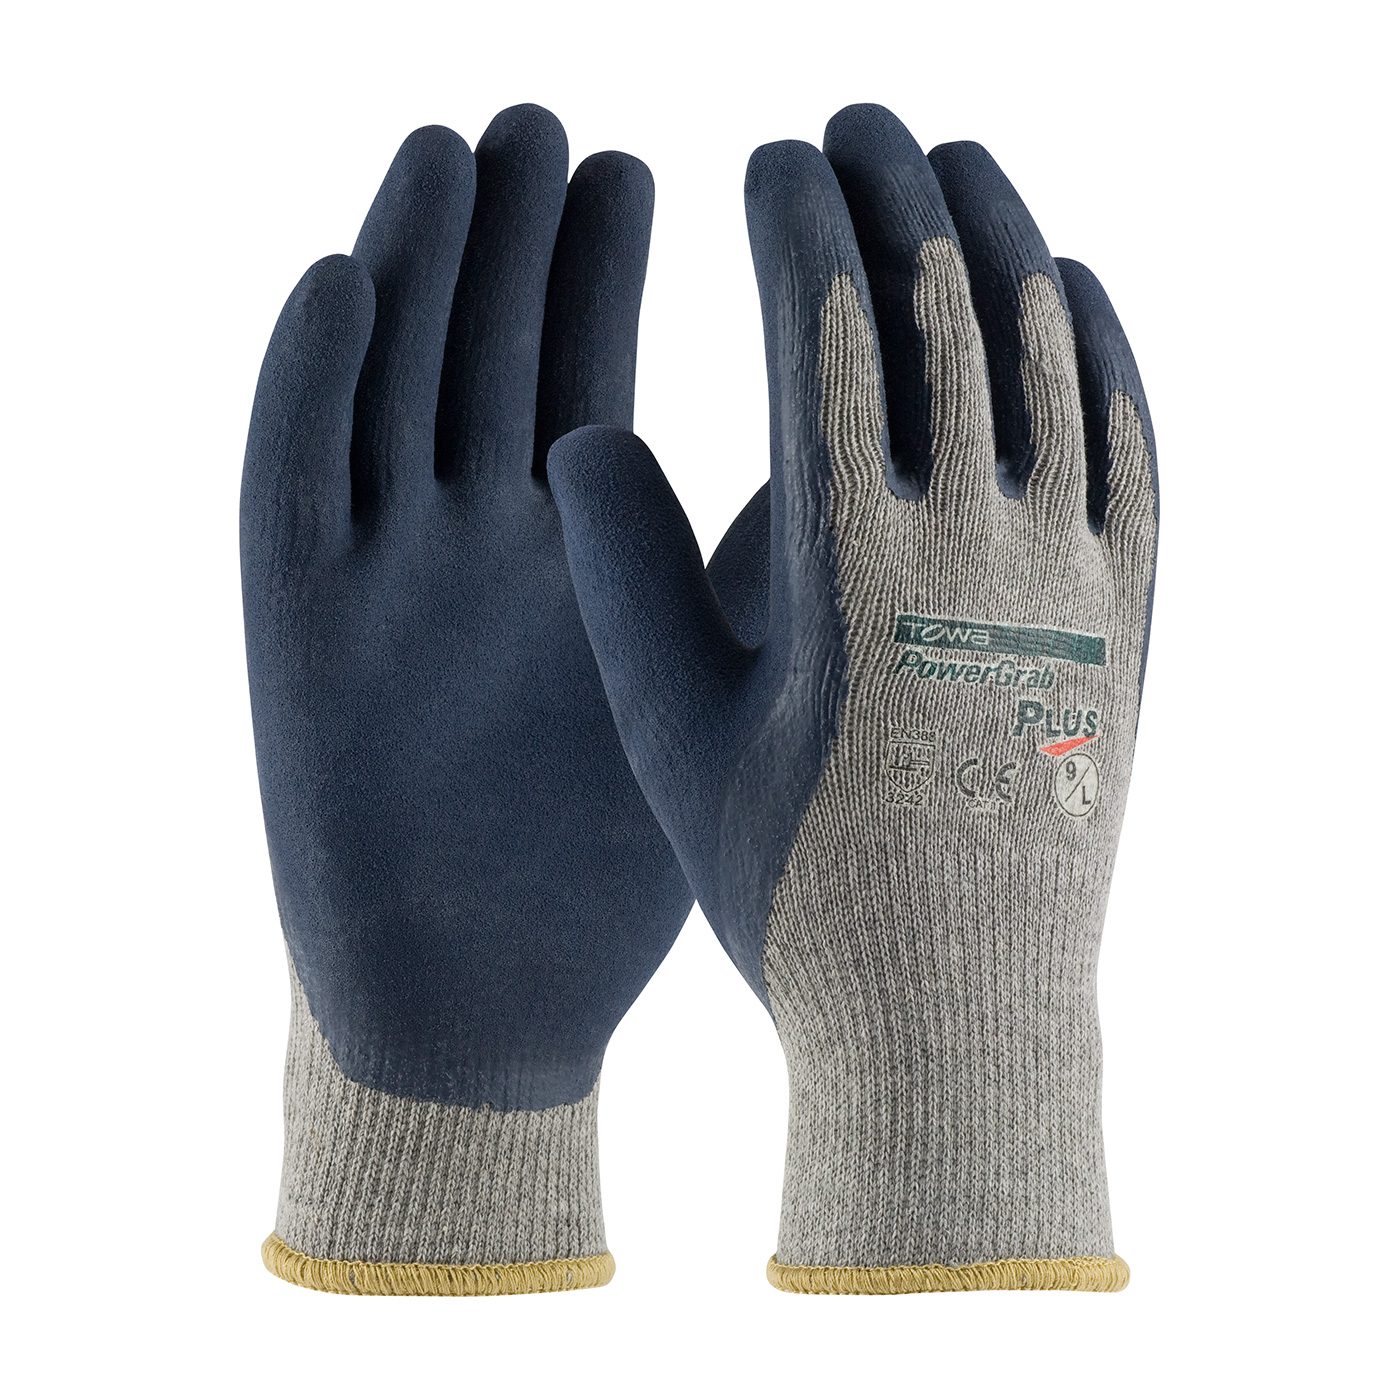 PIP® PowerGrab™ Plus Seamless Knit Cotton / Polyester Glove with Latex Coated MicroFinish Grip on Palm & Fingers #39-C1600